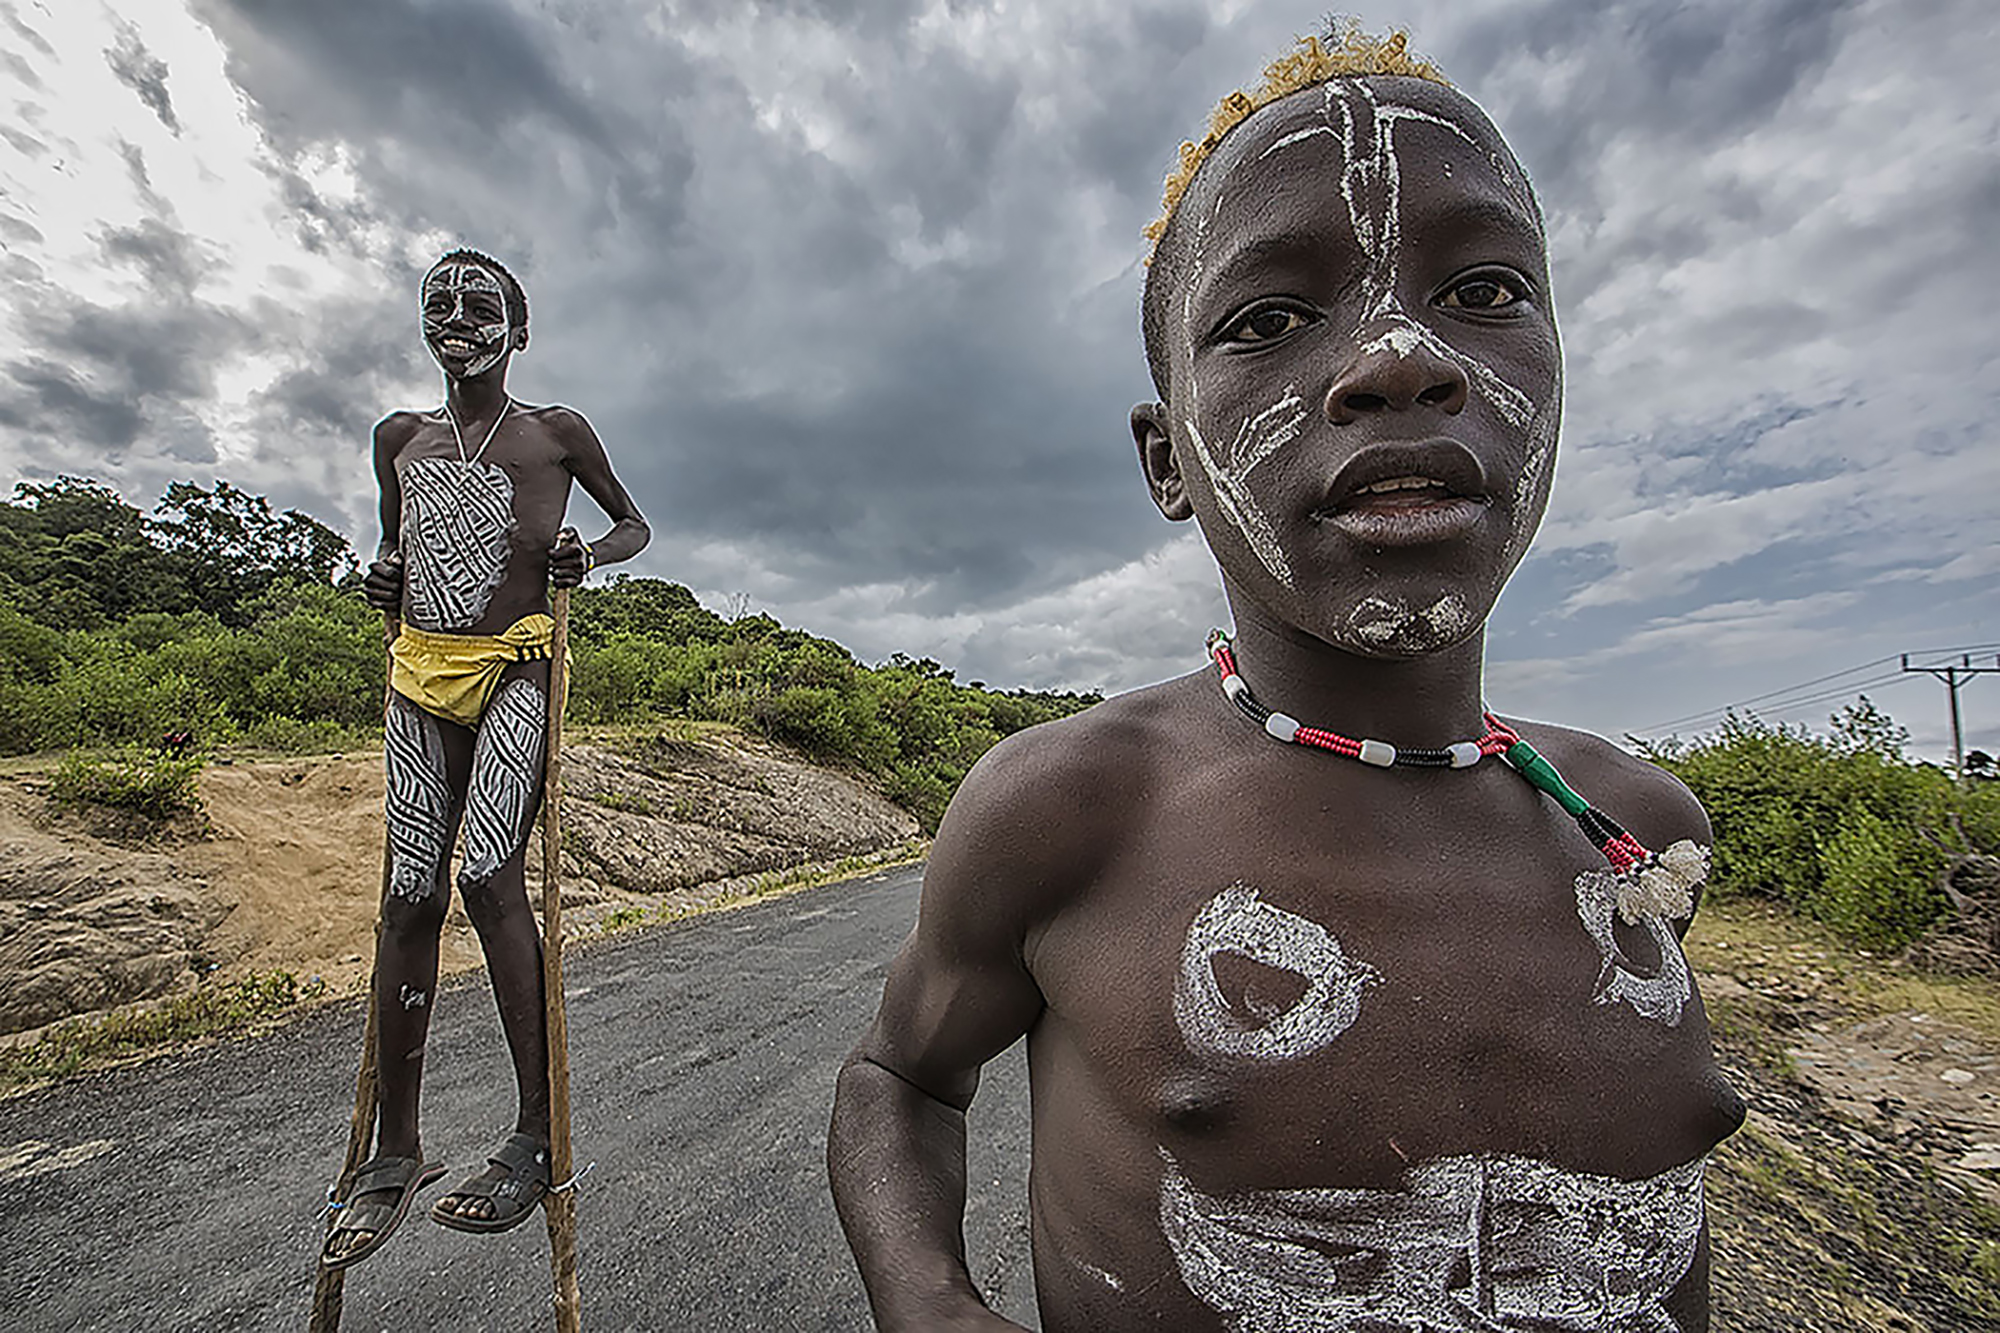 'Boys on Stilts' - Pictured is two Hamar tribe boys who fashioned themselves a pair of makeshift stilts out of sticks. 